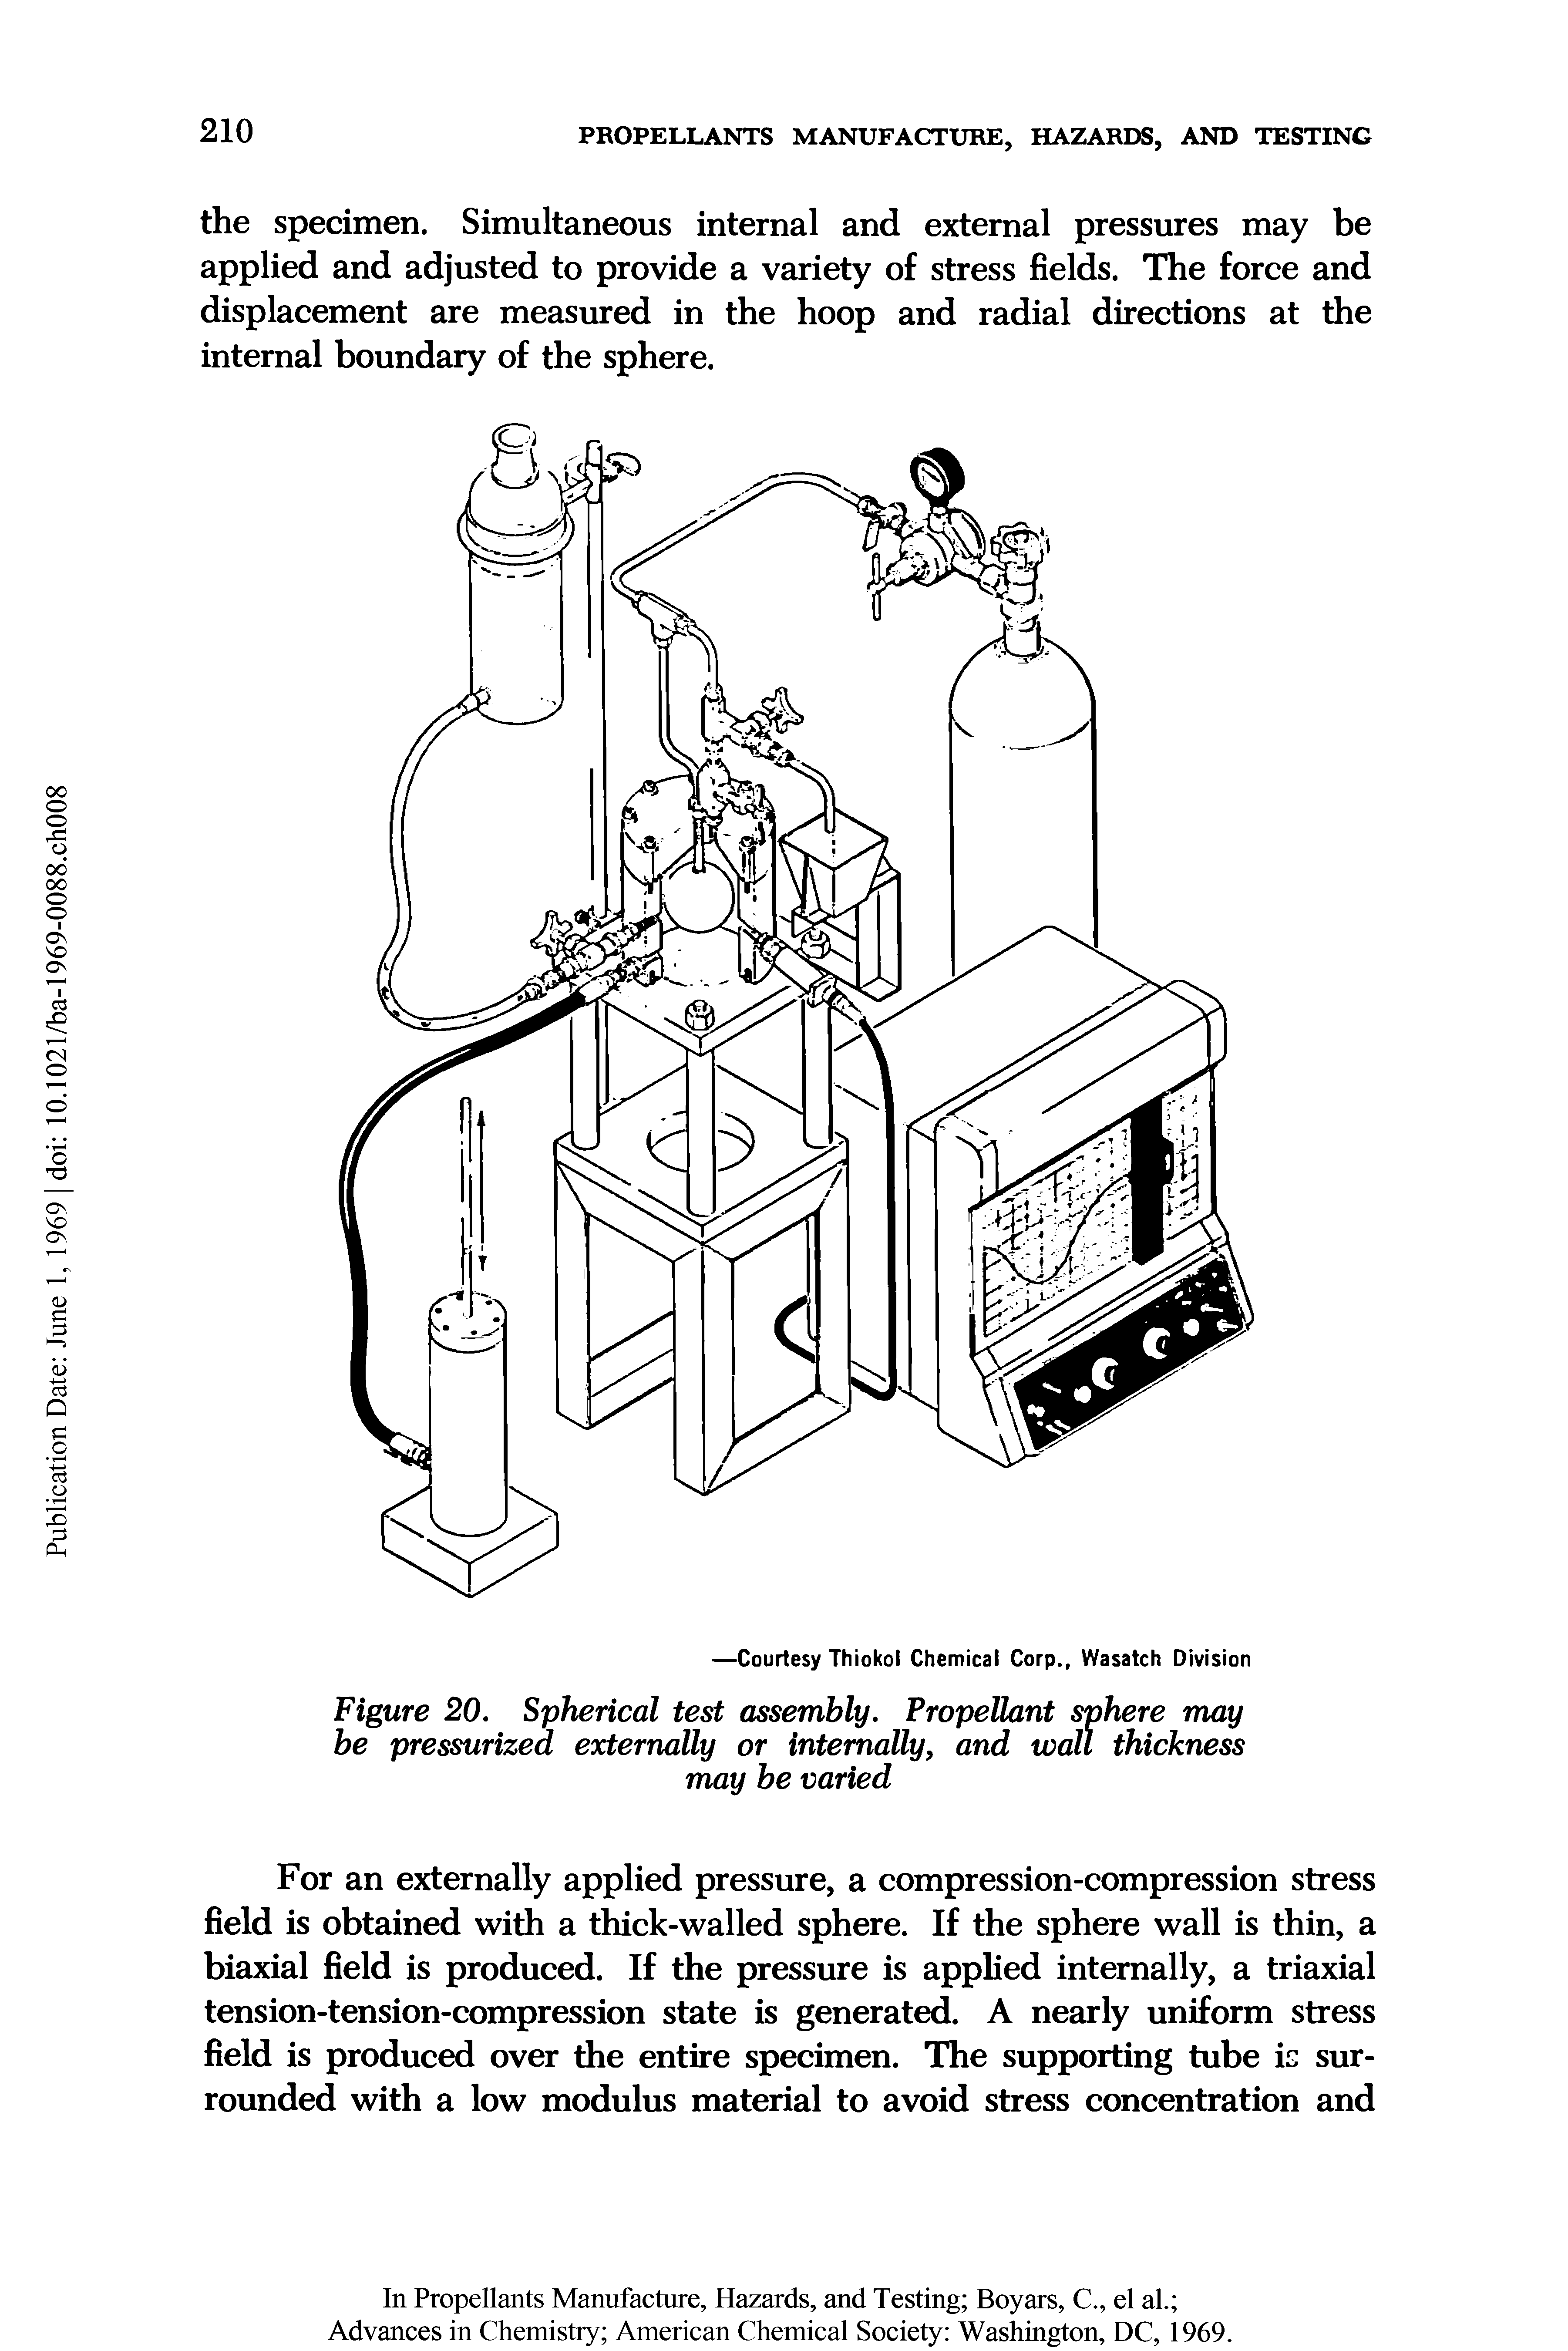 Figure 20. Spherical test assembly. Propellant sphere may be pressurized externally or internally, and wall thickness may be varied...